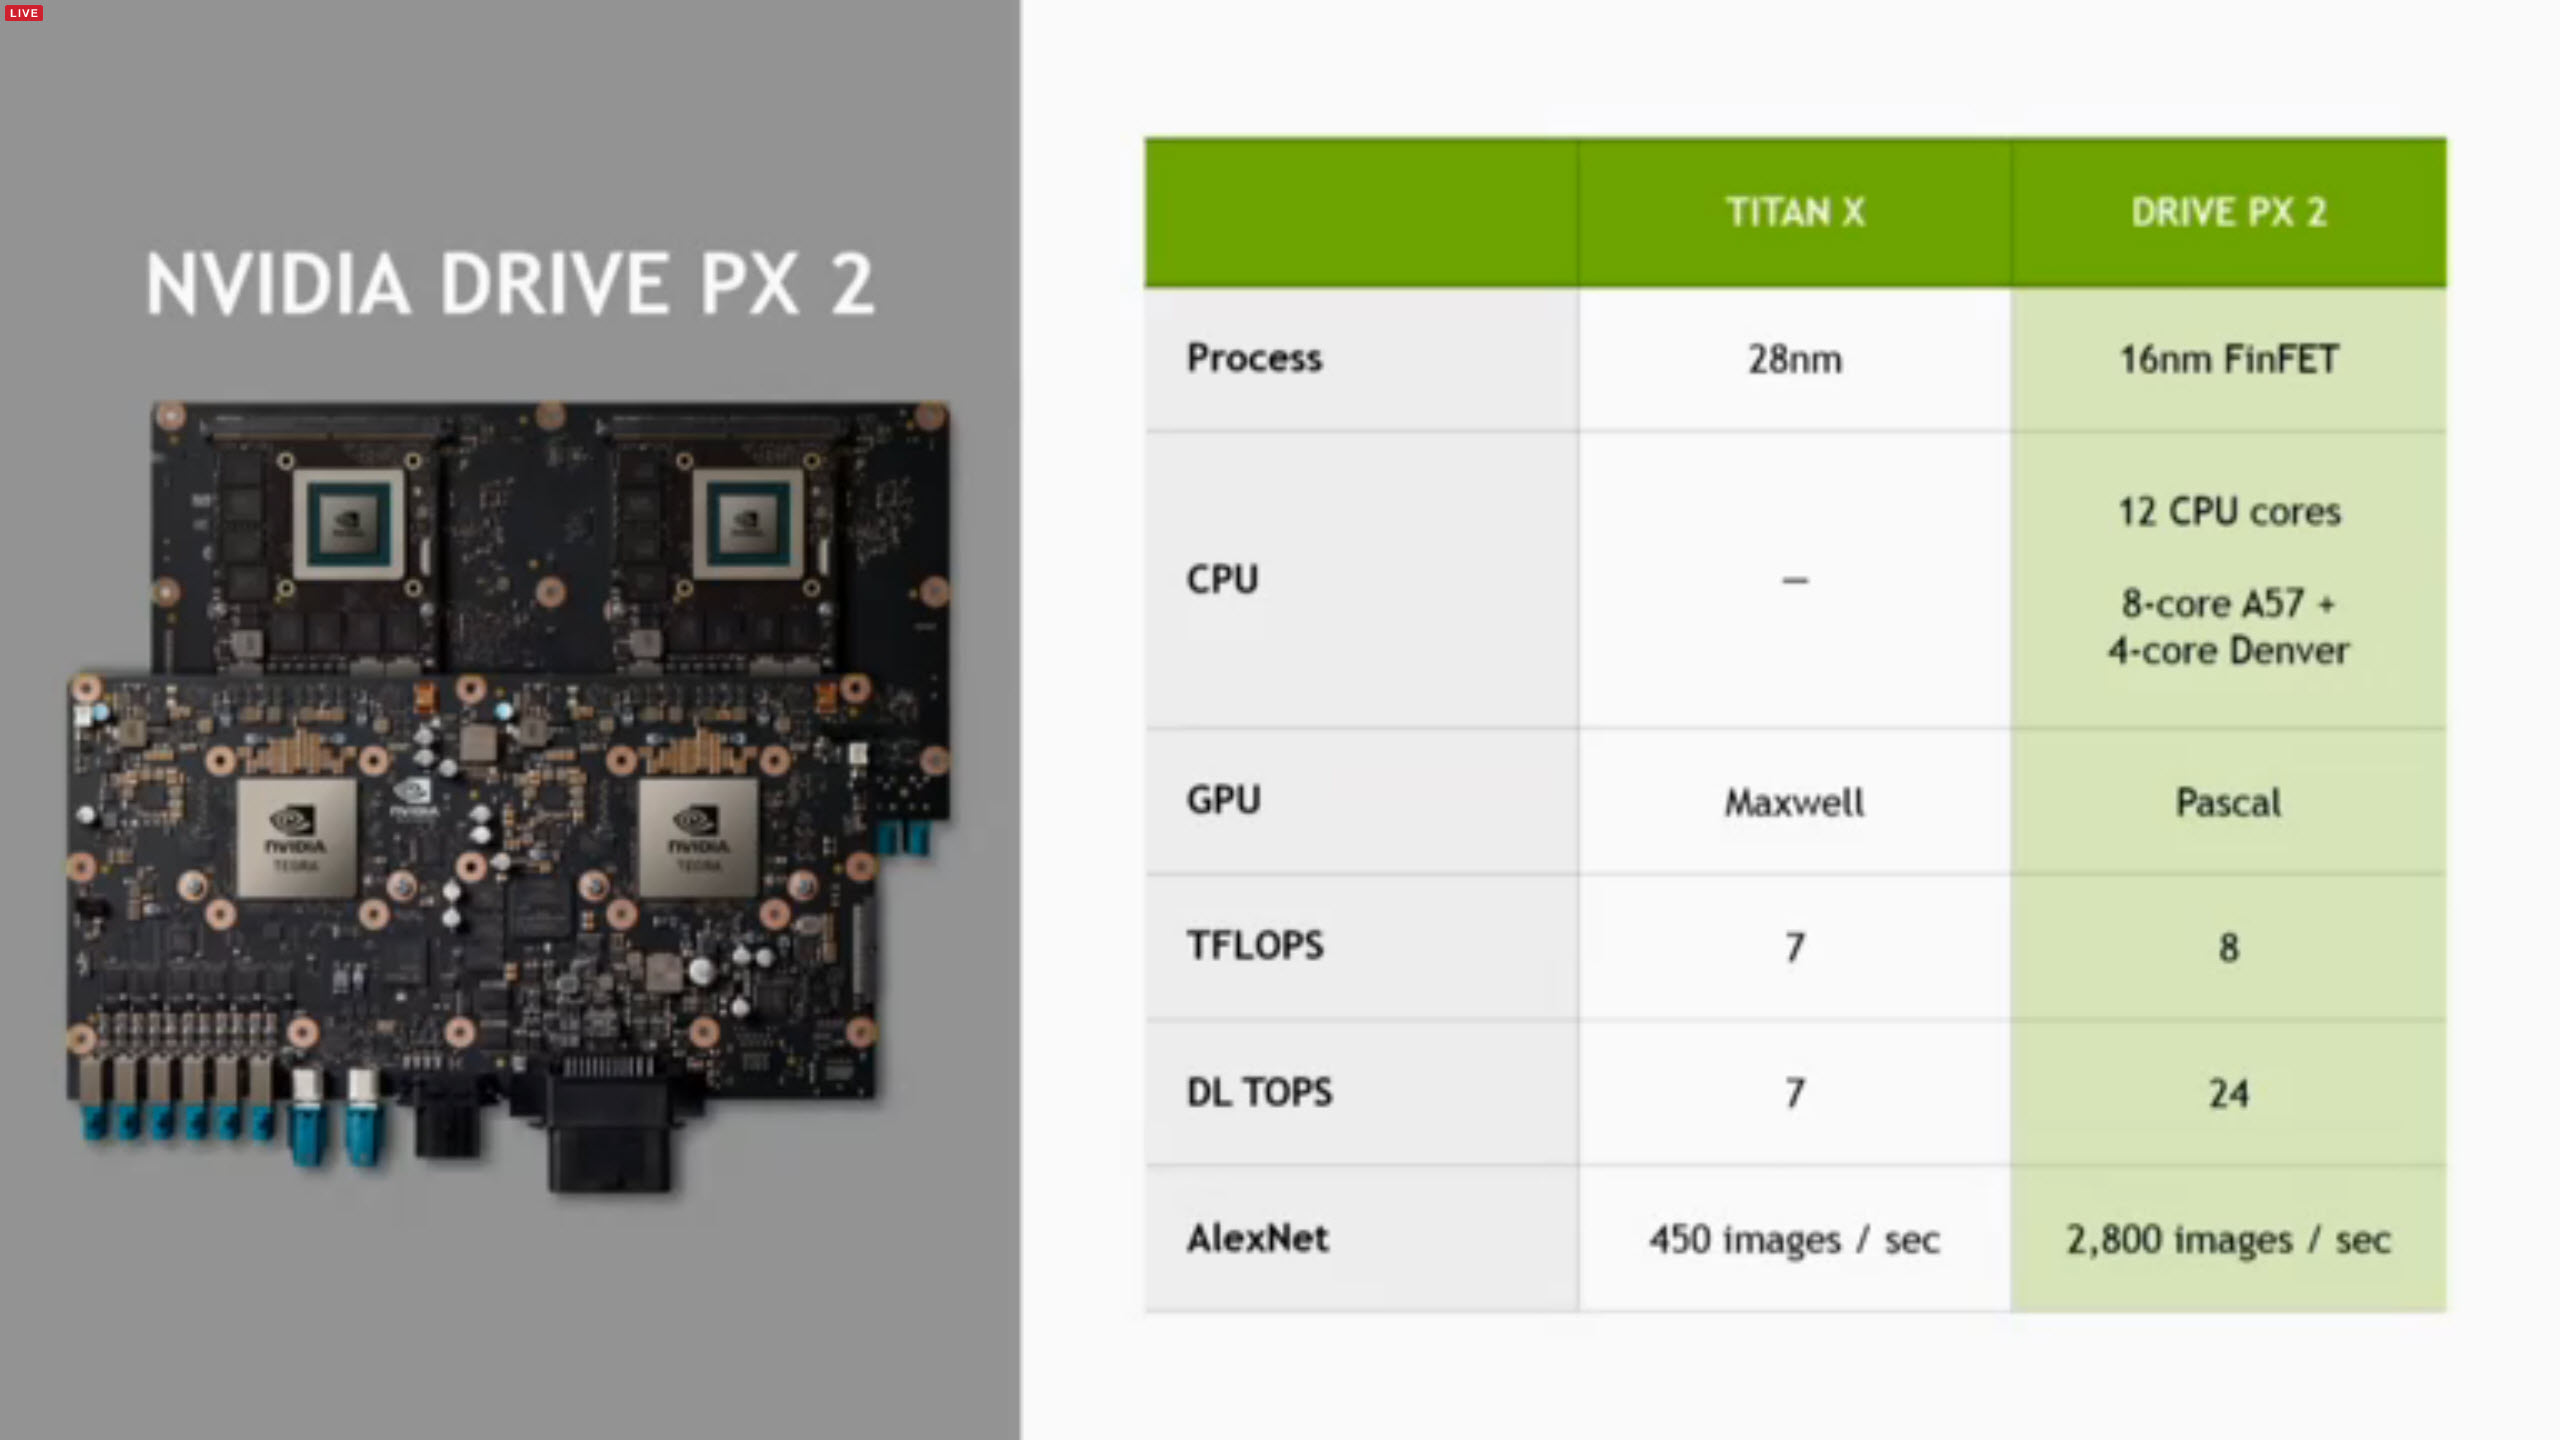 NVIDIA-Drive-PX-2-Specifications.jpg